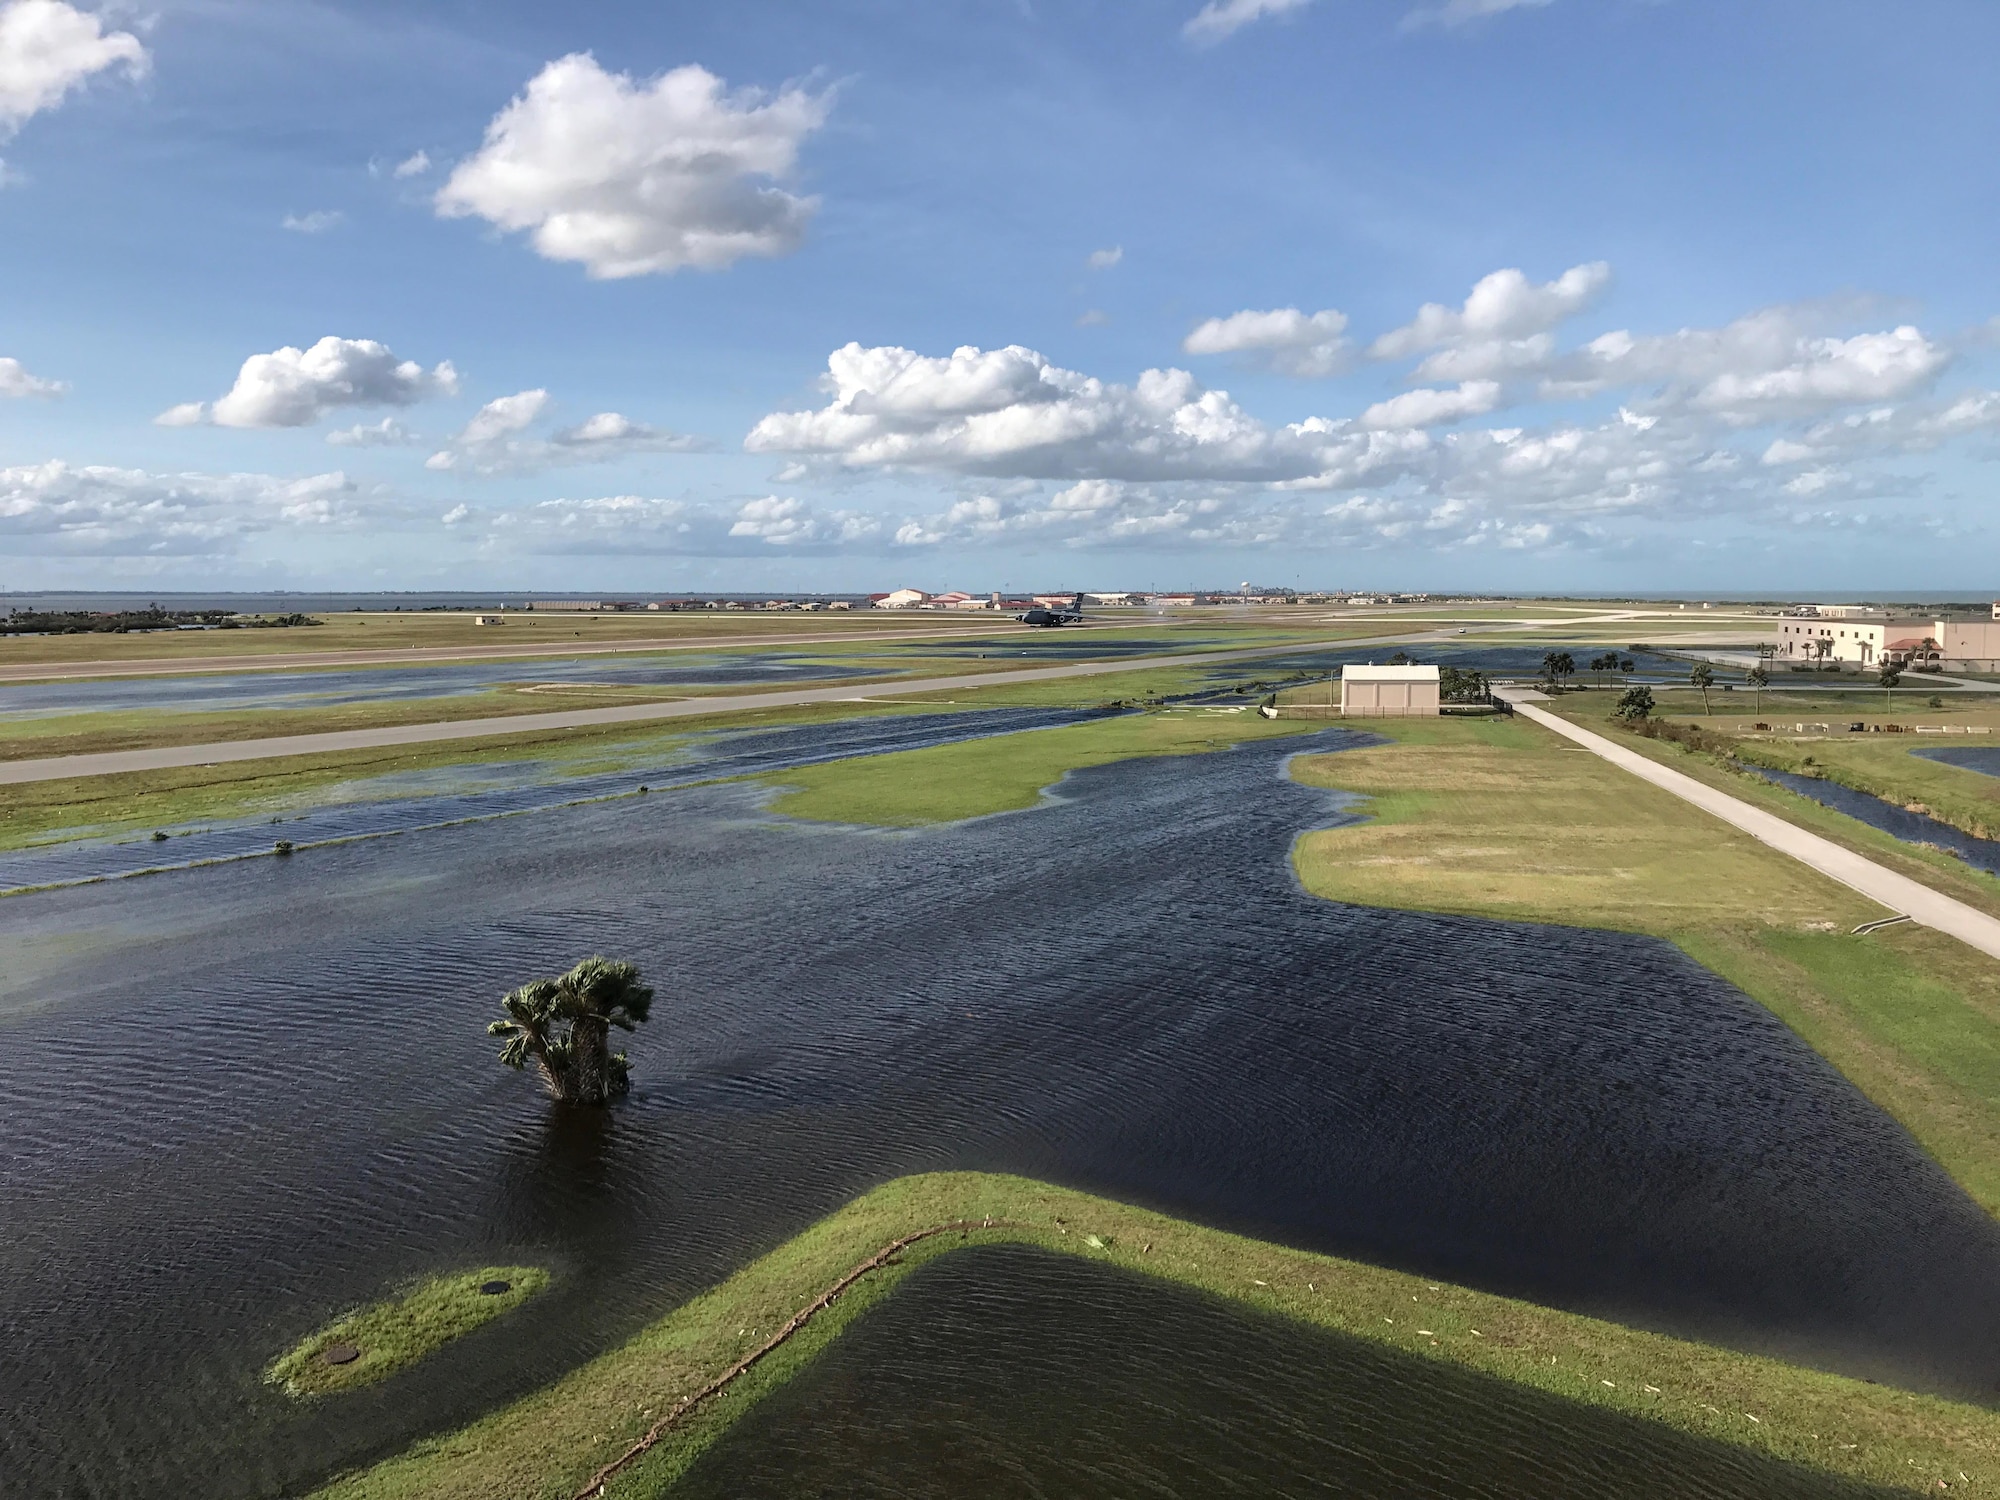 After Hurricane Irma passed over Central Florida in the early morning hours of Sept. 11, 2017, Patrick Air Force Base took on water from the heavy rain and sustained minimal damage. After several days it was operational again. (U.S. Air Force photo/1st Lt. Stephen Collier)